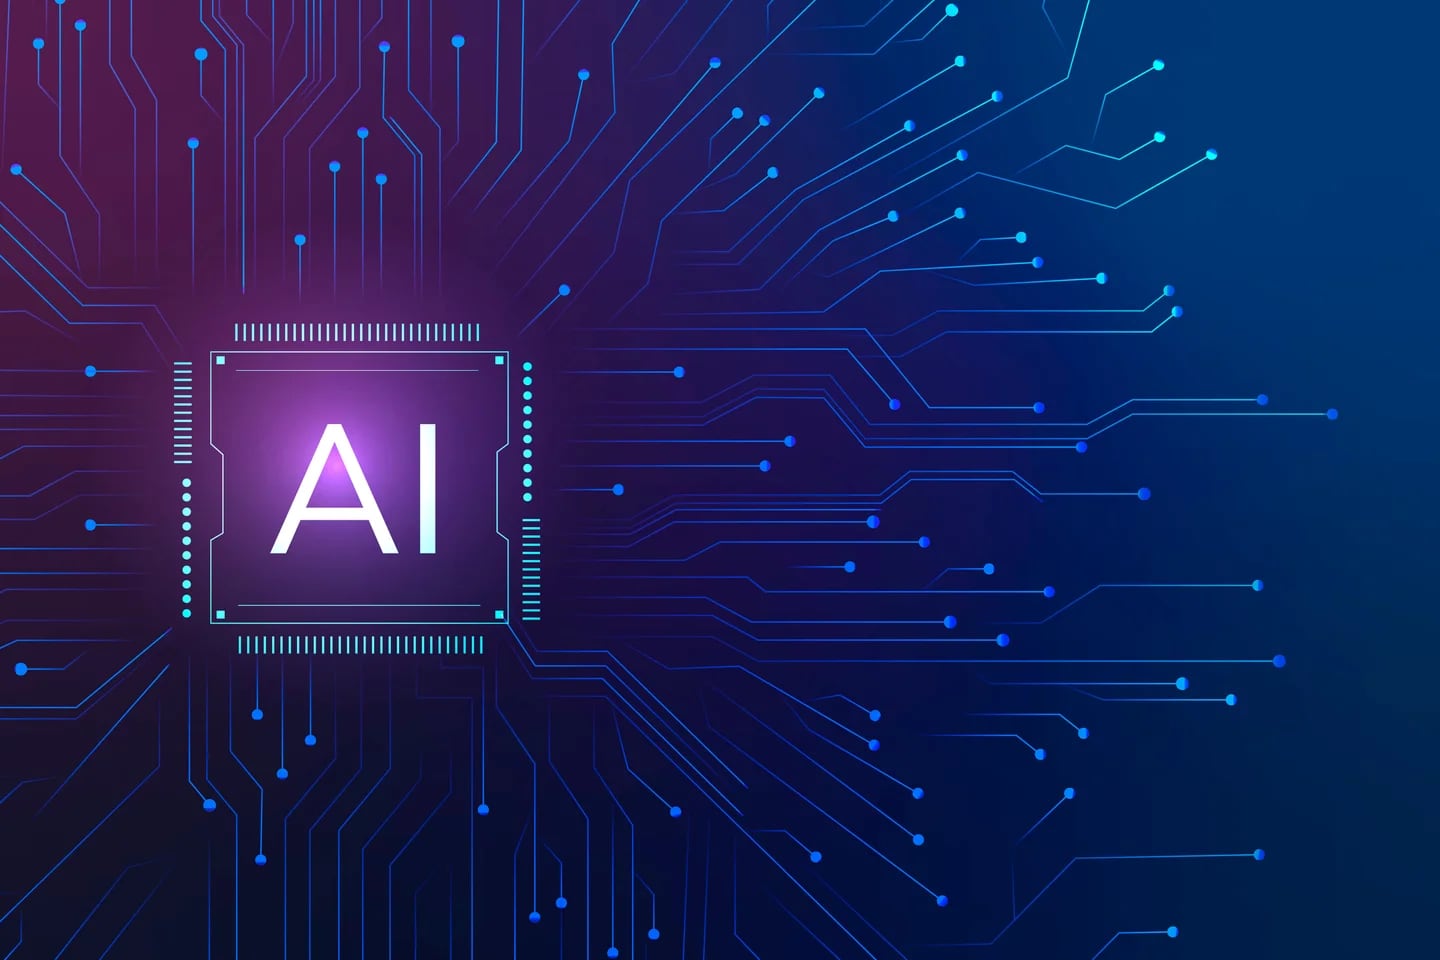 Meta is looking to leverage Apple's vast distribution of devices to strengthen its position in artificial intelligence